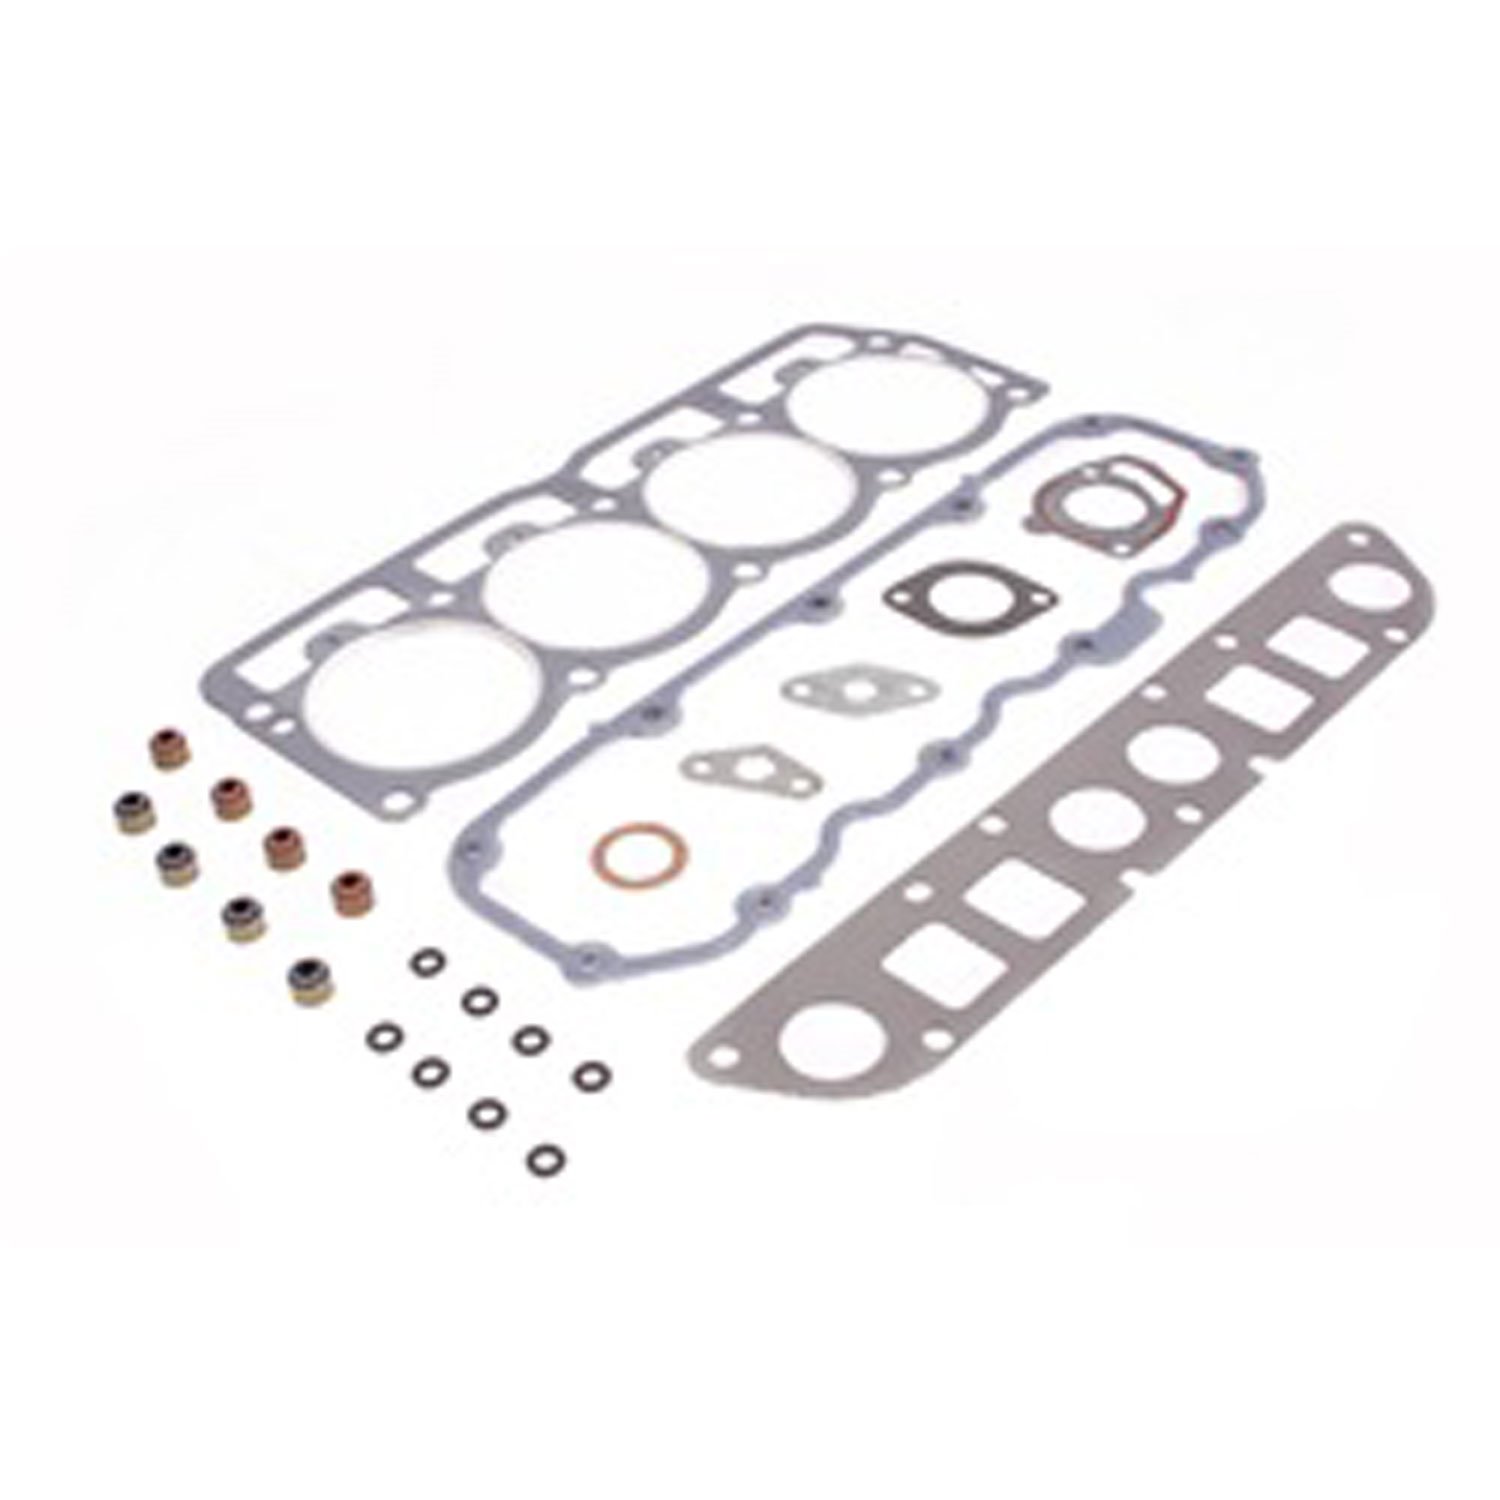 Complete Upper Engine Gasket Set For 1994-2002 Wrangler YJ /TJ And 1994-2000 Cherokee XJ W/ 2.5L By Omix-ADA